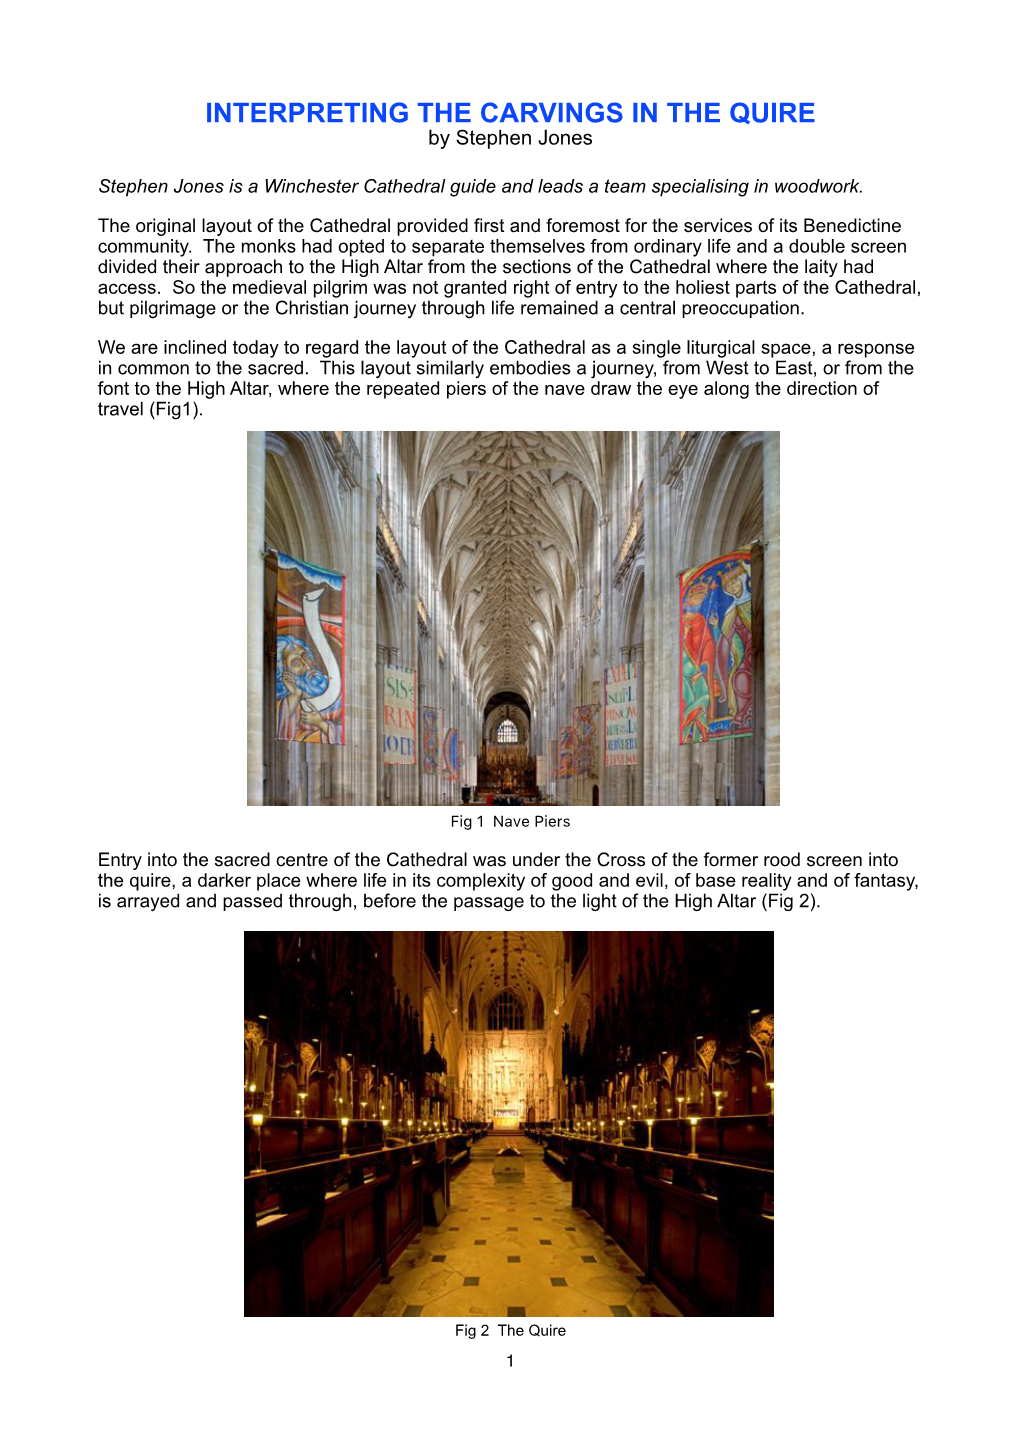 INTERPRETING the CARVINGS in the QUIRE by Stephen Jones